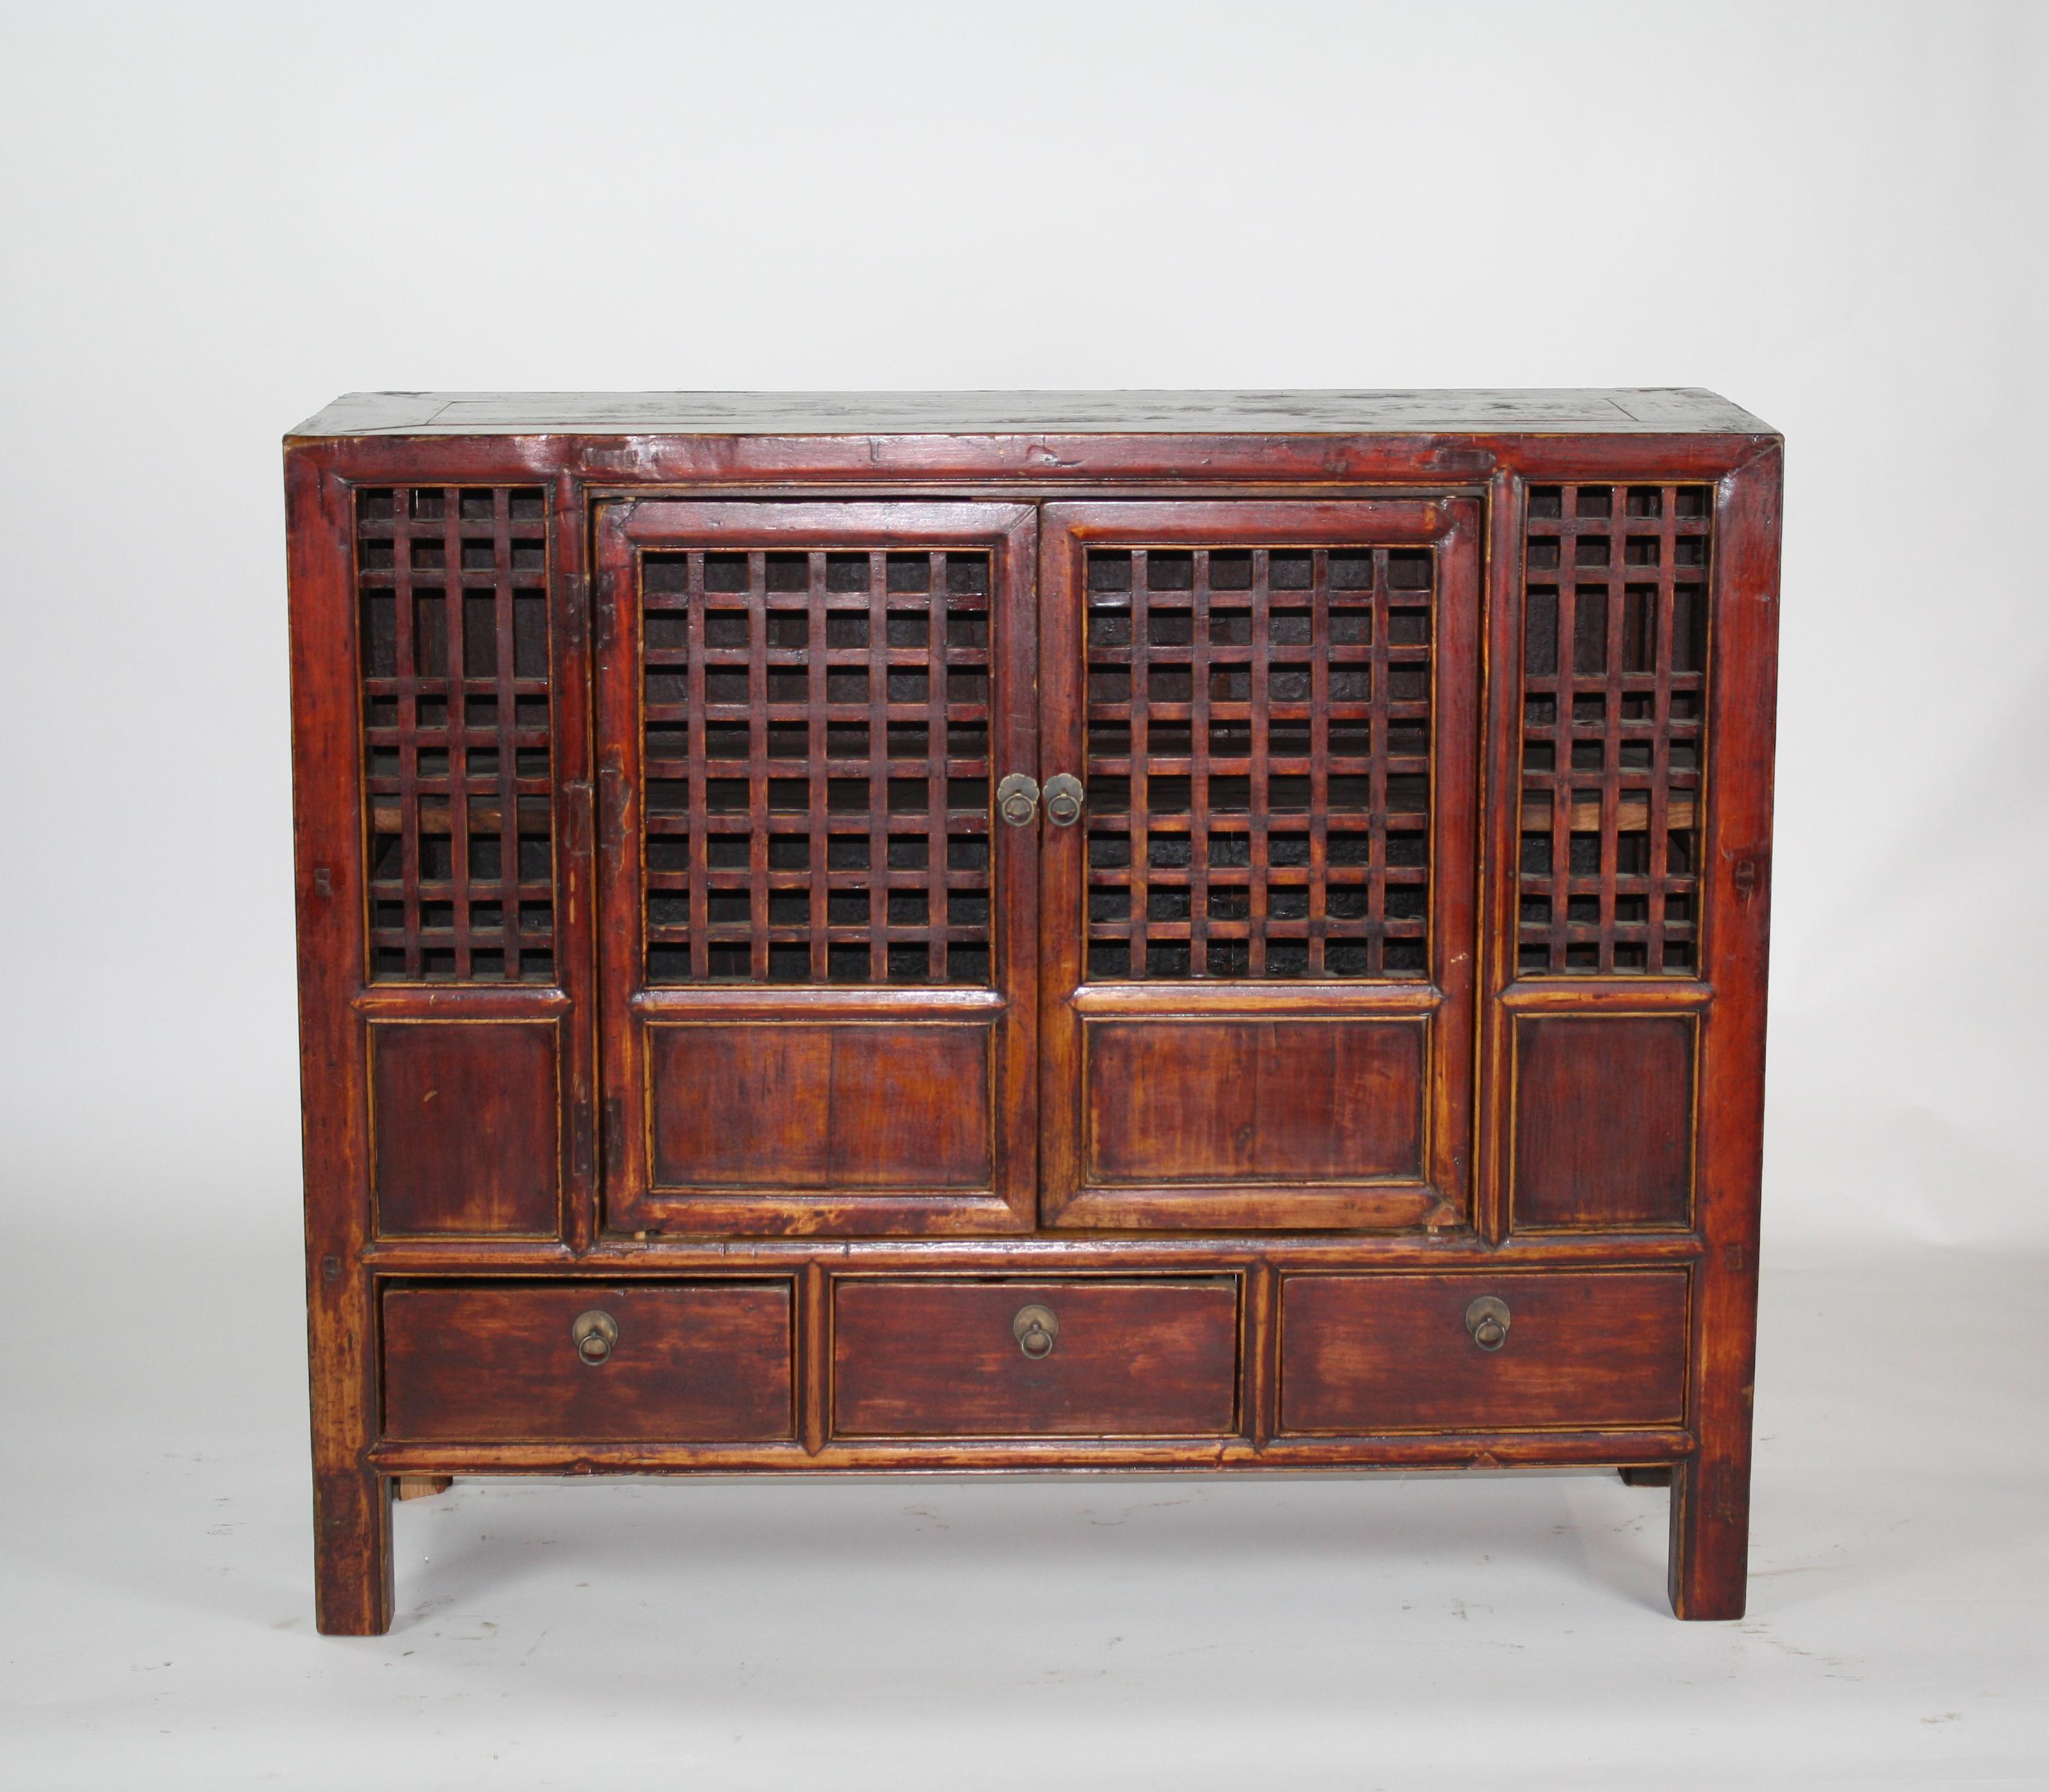 This large cabinet was once used in a provincial kitchen to store fruits and vegetables. It has open lattice doors and an open lattice back, designed to keep the stored contents fresh. The cabinet's masterful mortise and tenon construction joins the